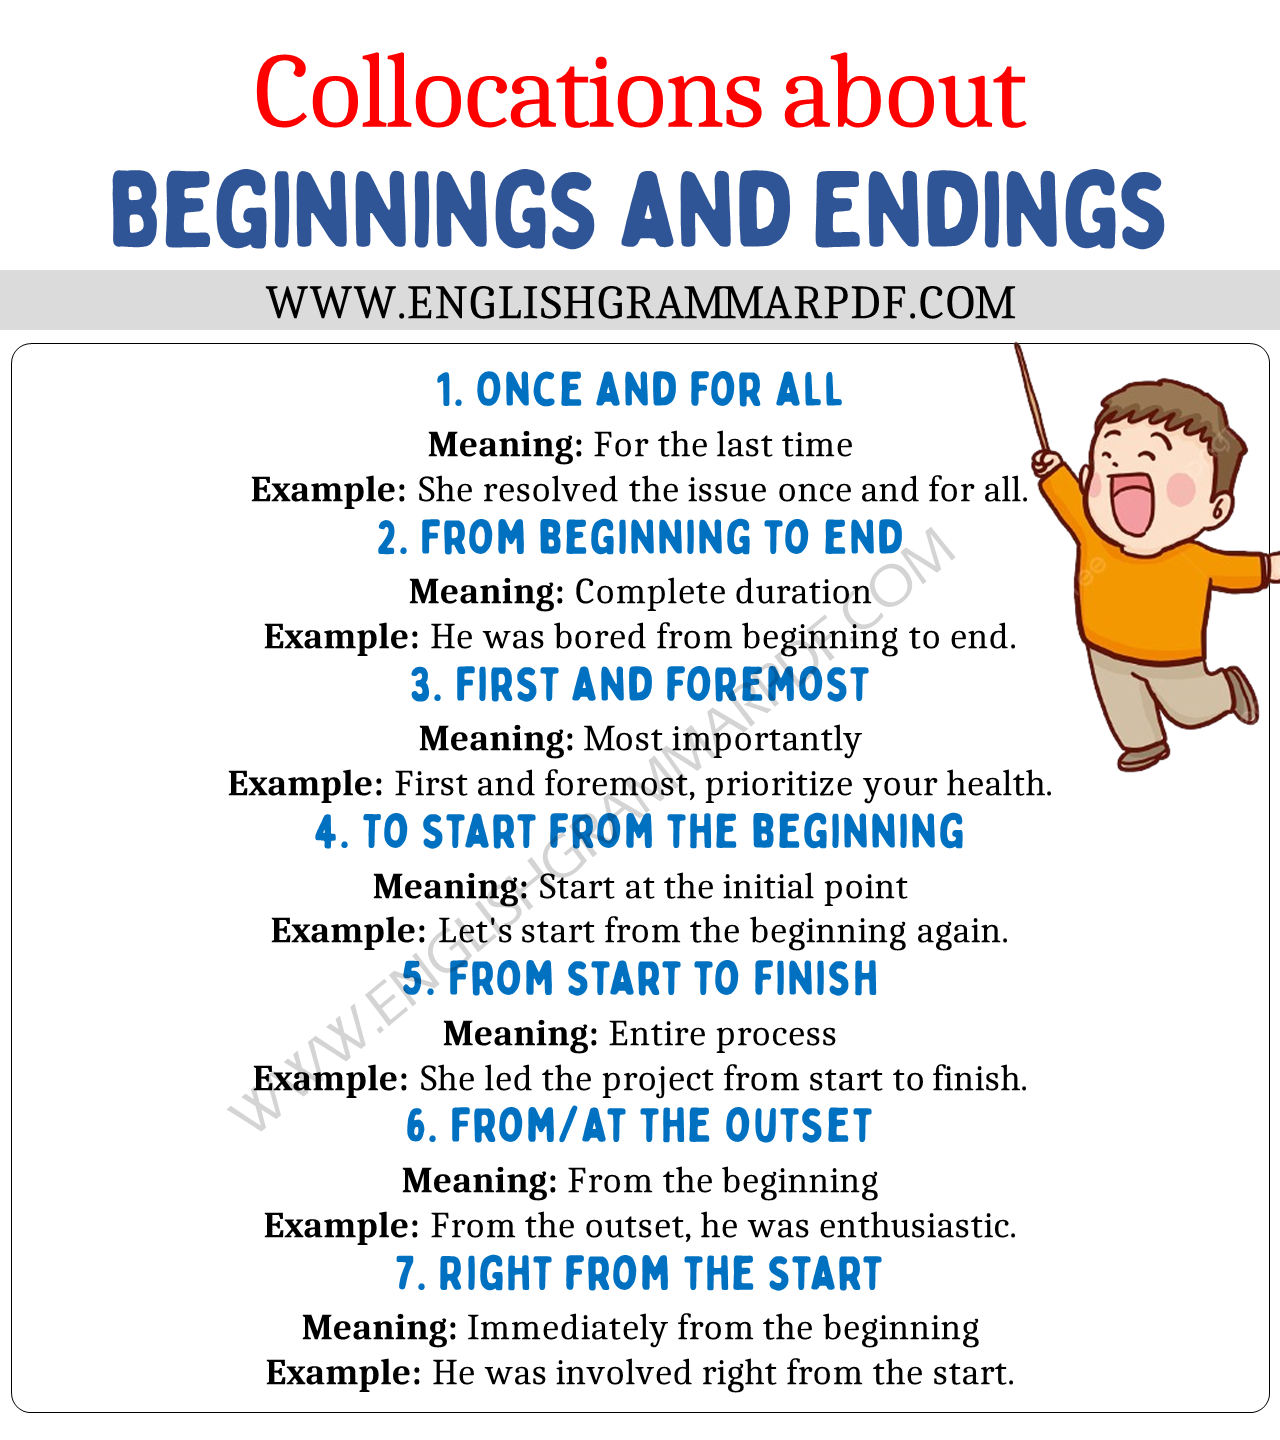 Collocations about Beginnings and Endings